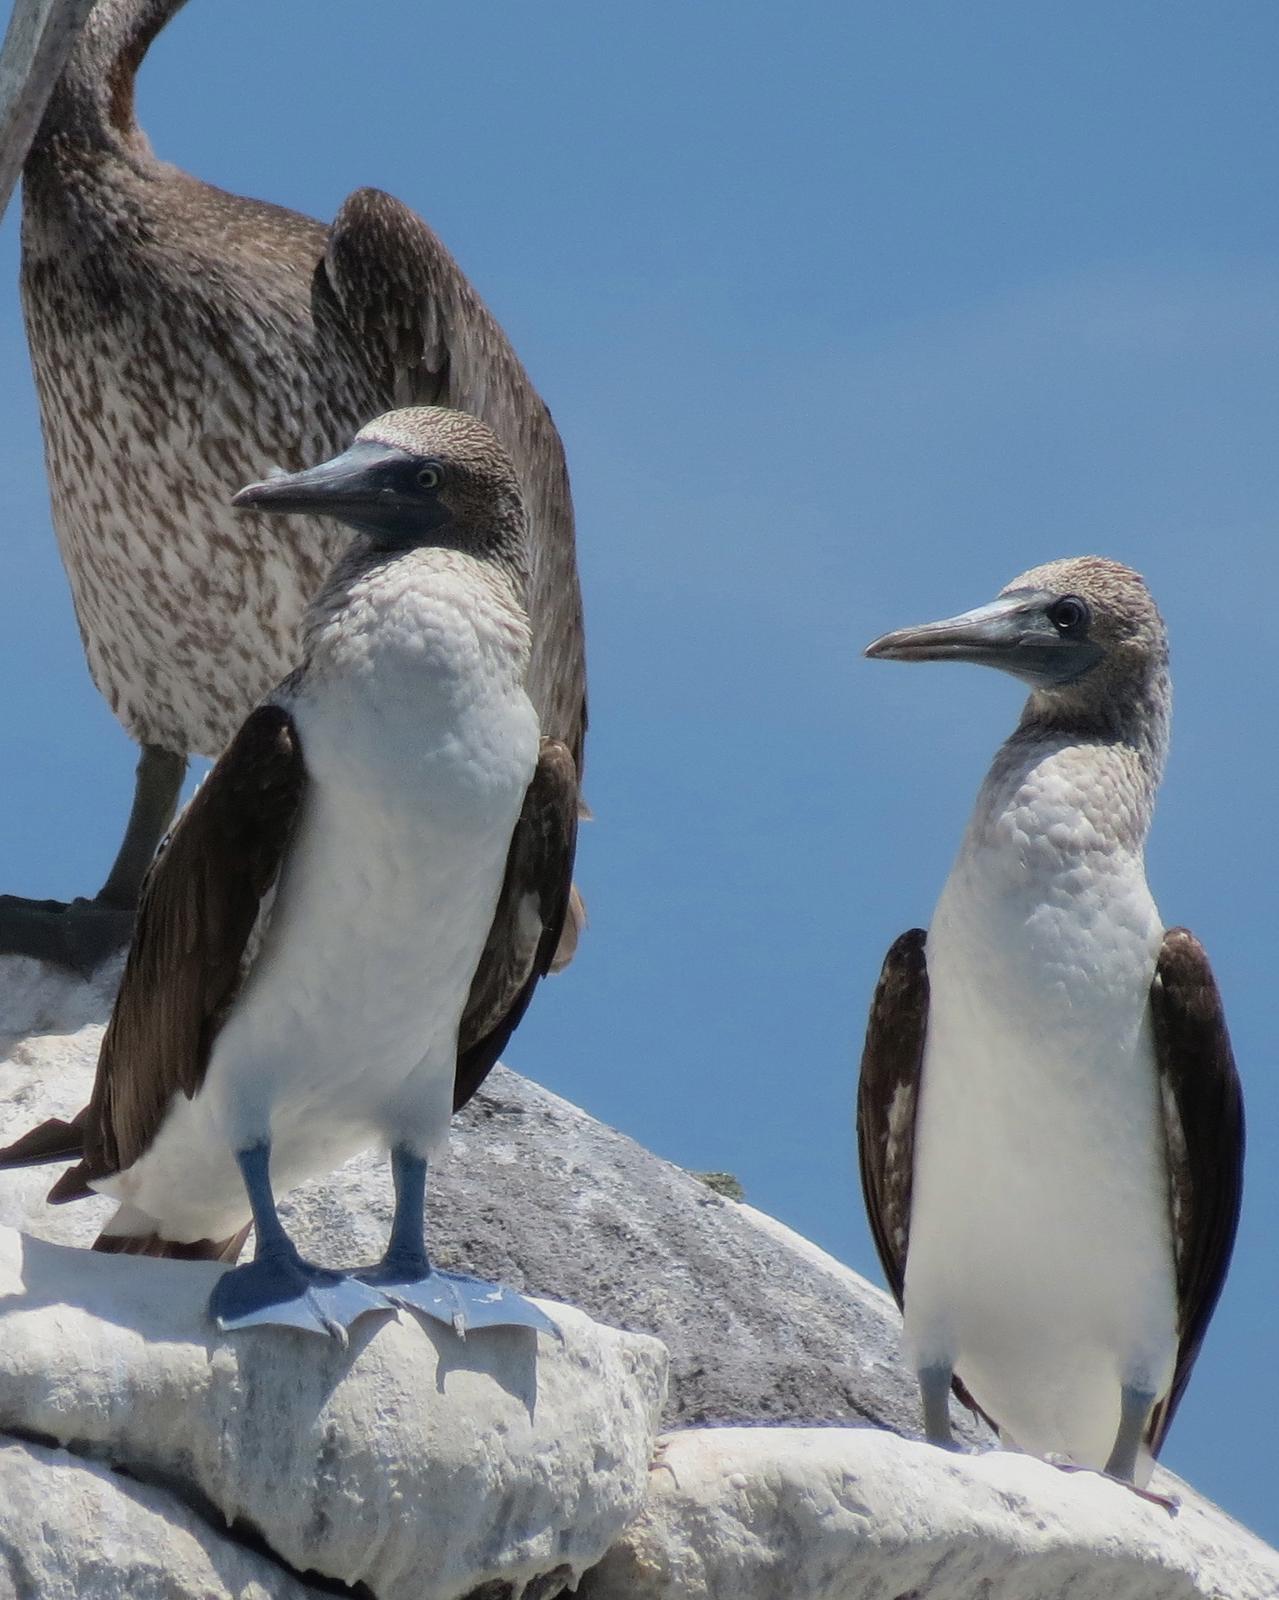 Blue-footed Booby Photo by John van Dort